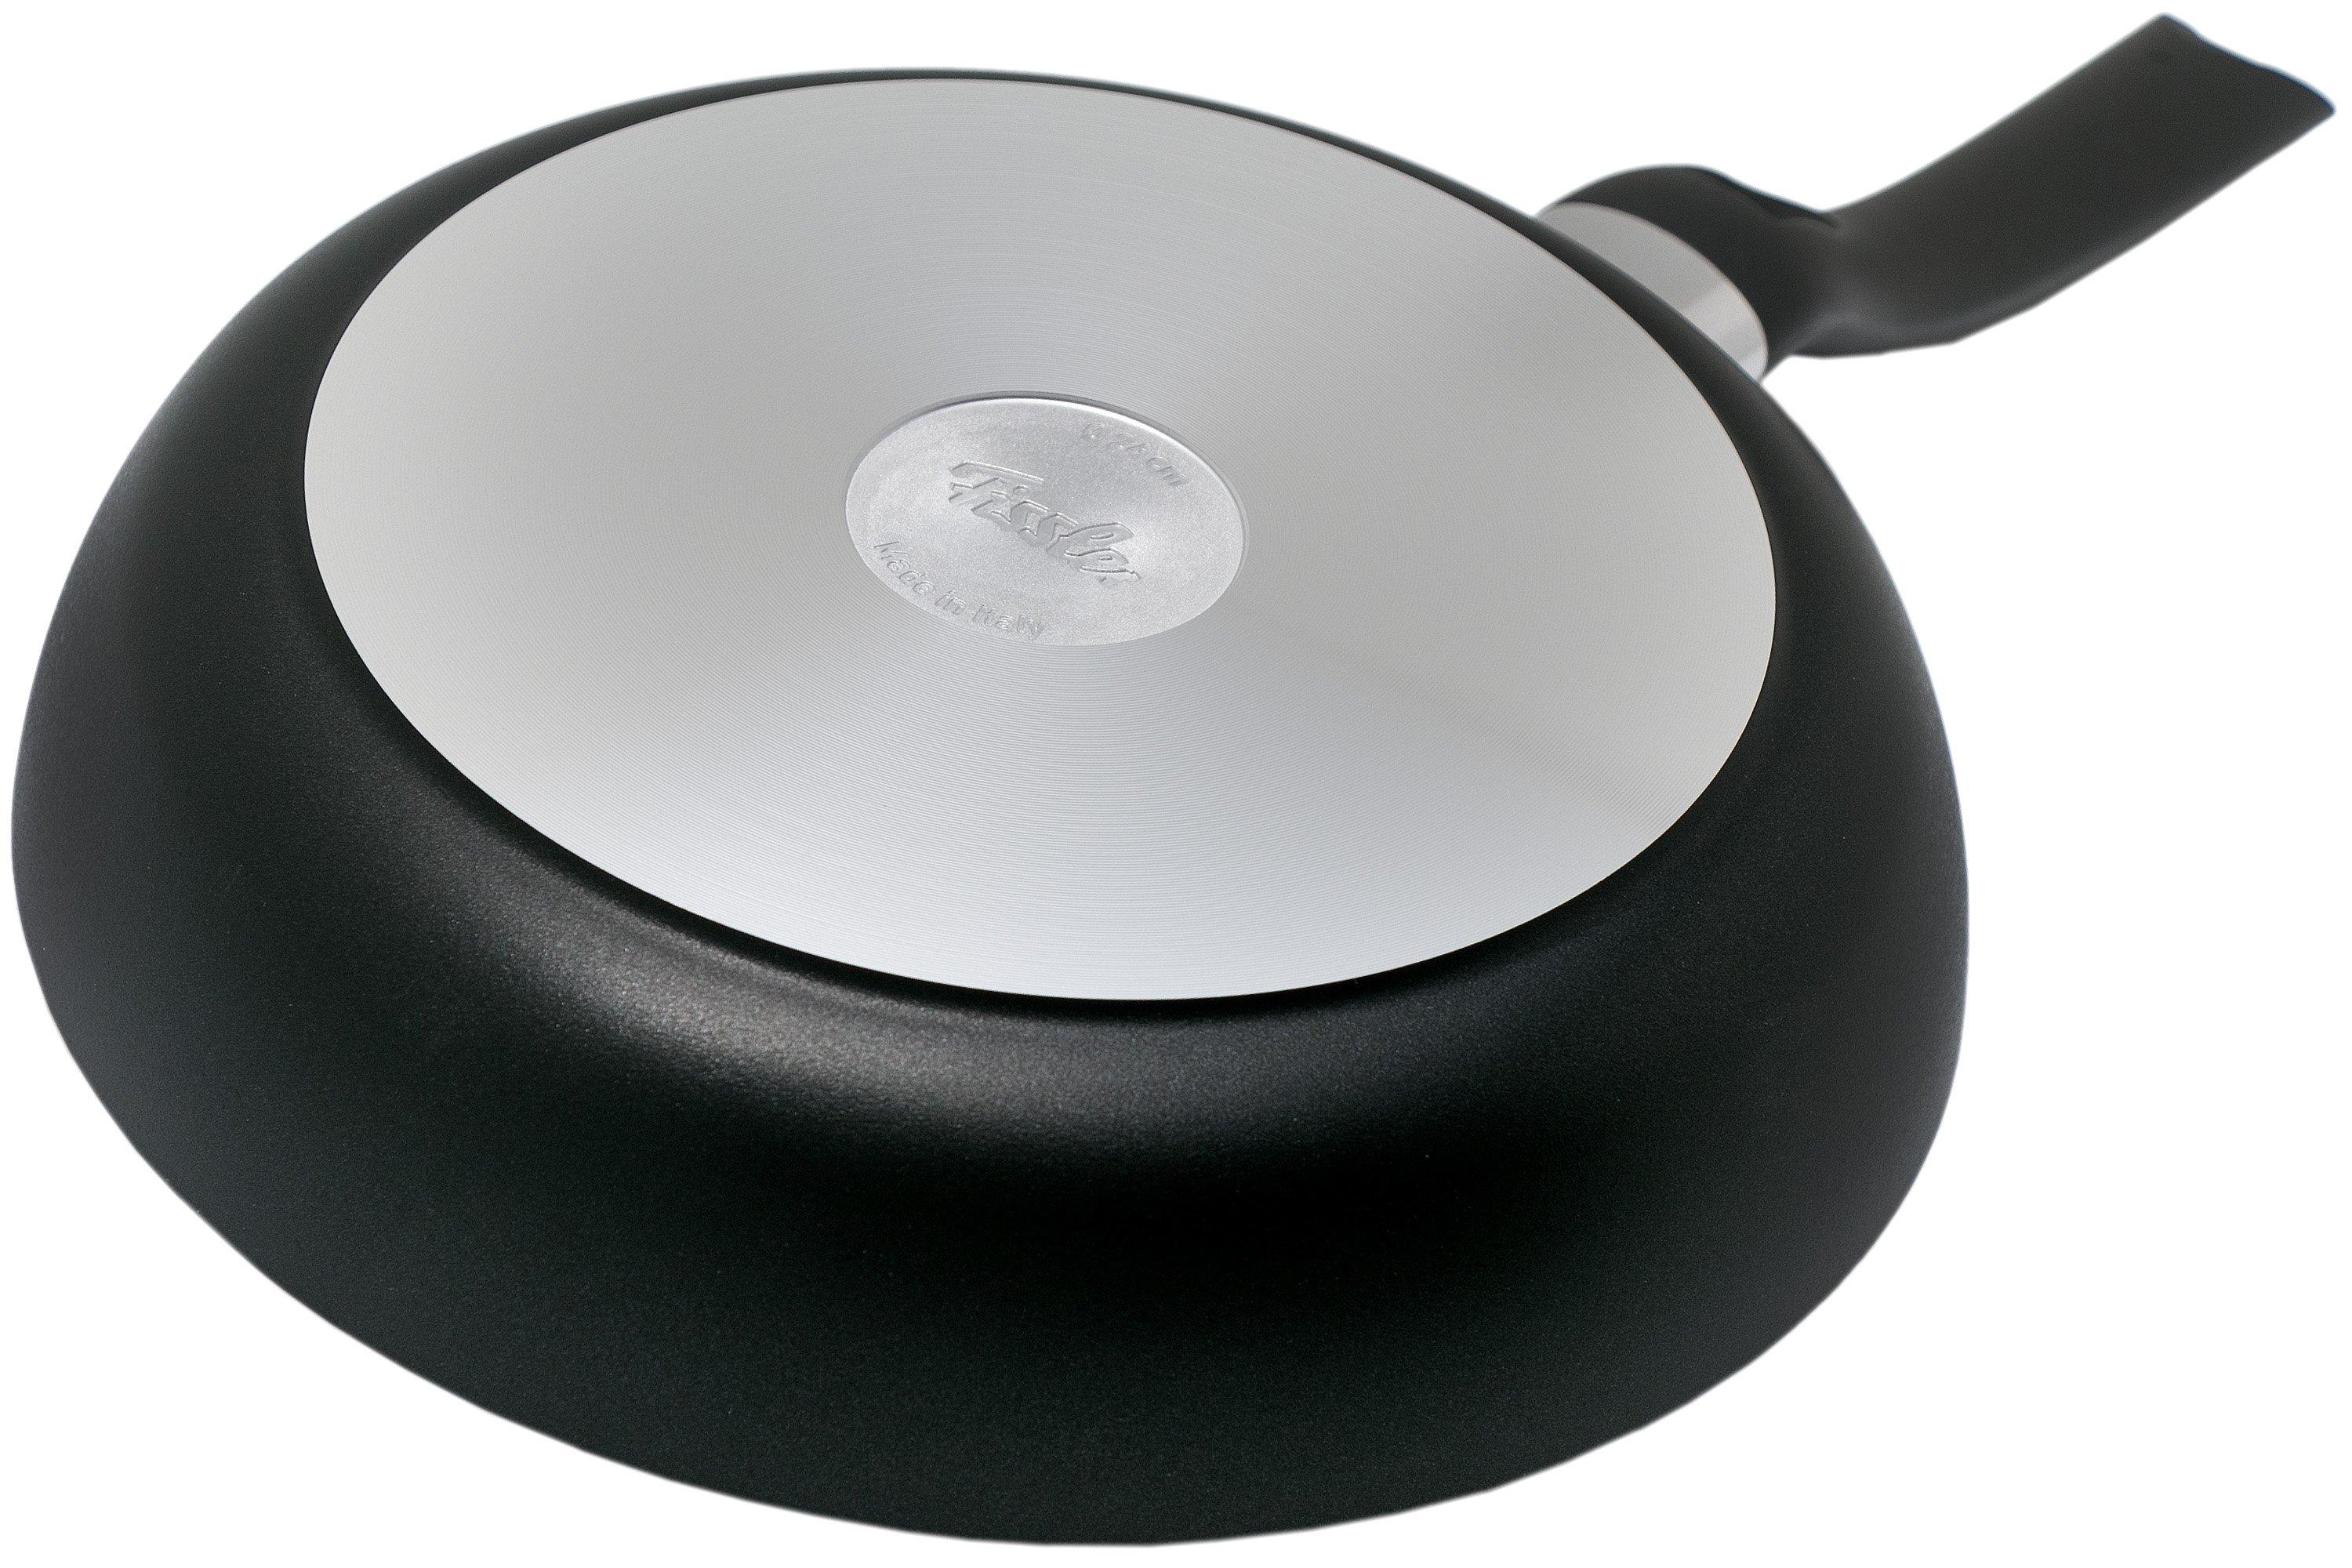 Cenit Advantageously Fissler pan 24 frying shopping 045-300-24-100, | at cm